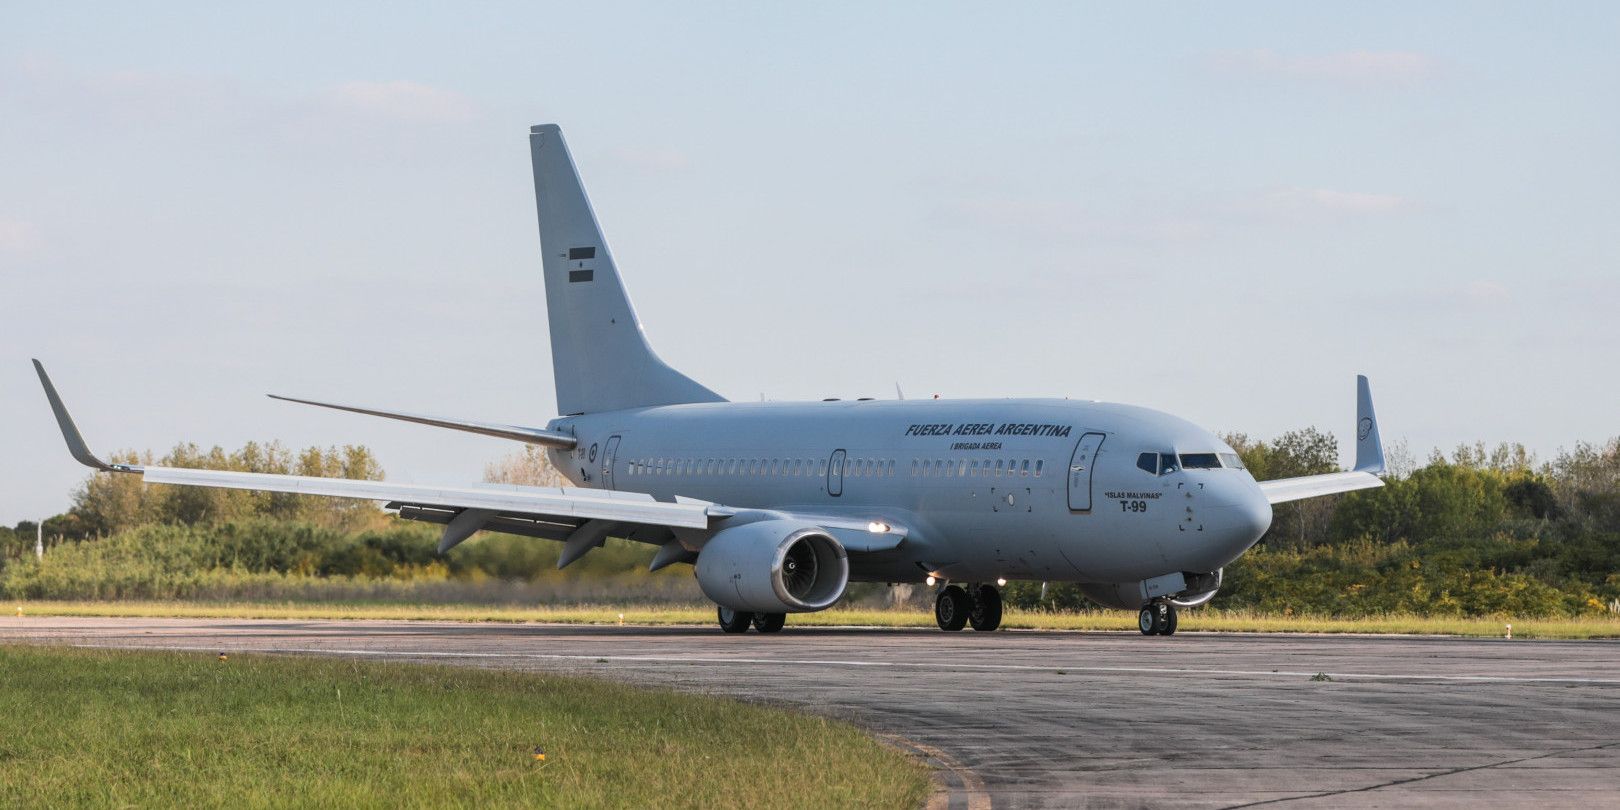 Why Flybondi Is Using A Military Boeing 737 For Commerical Flights